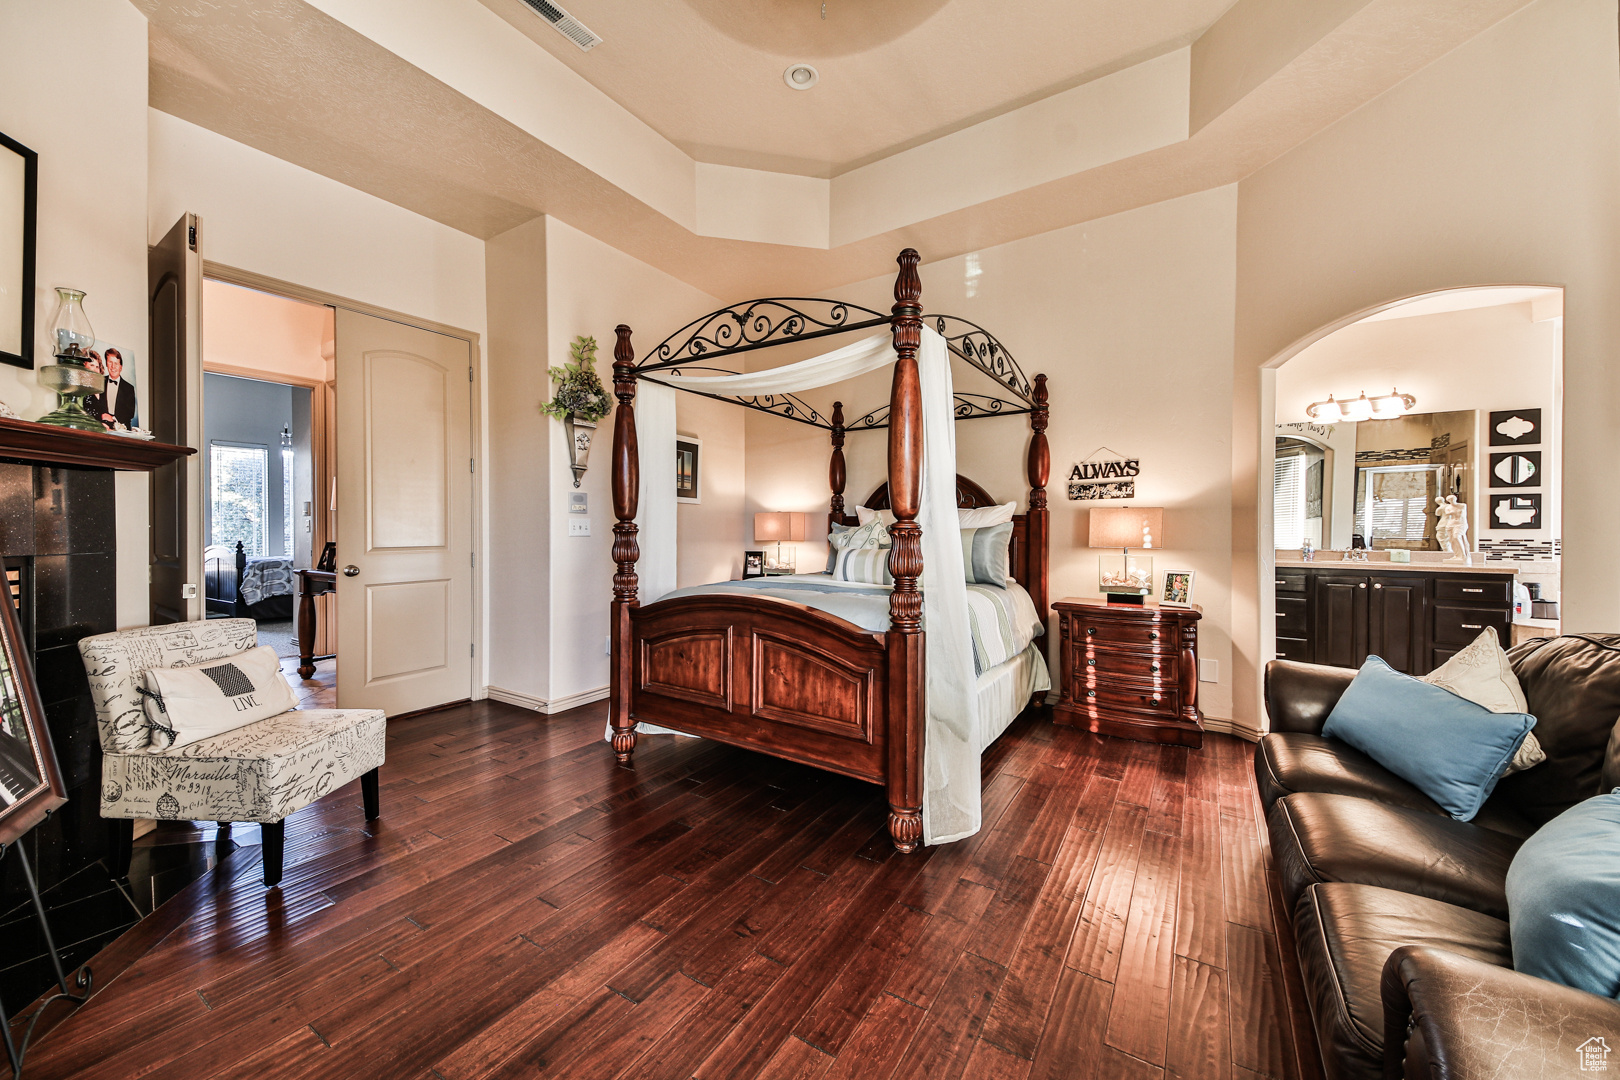 Bedroom featuring ensuite bath, dark hardwood / wood-style flooring, a tray ceiling, and a tiled fireplace